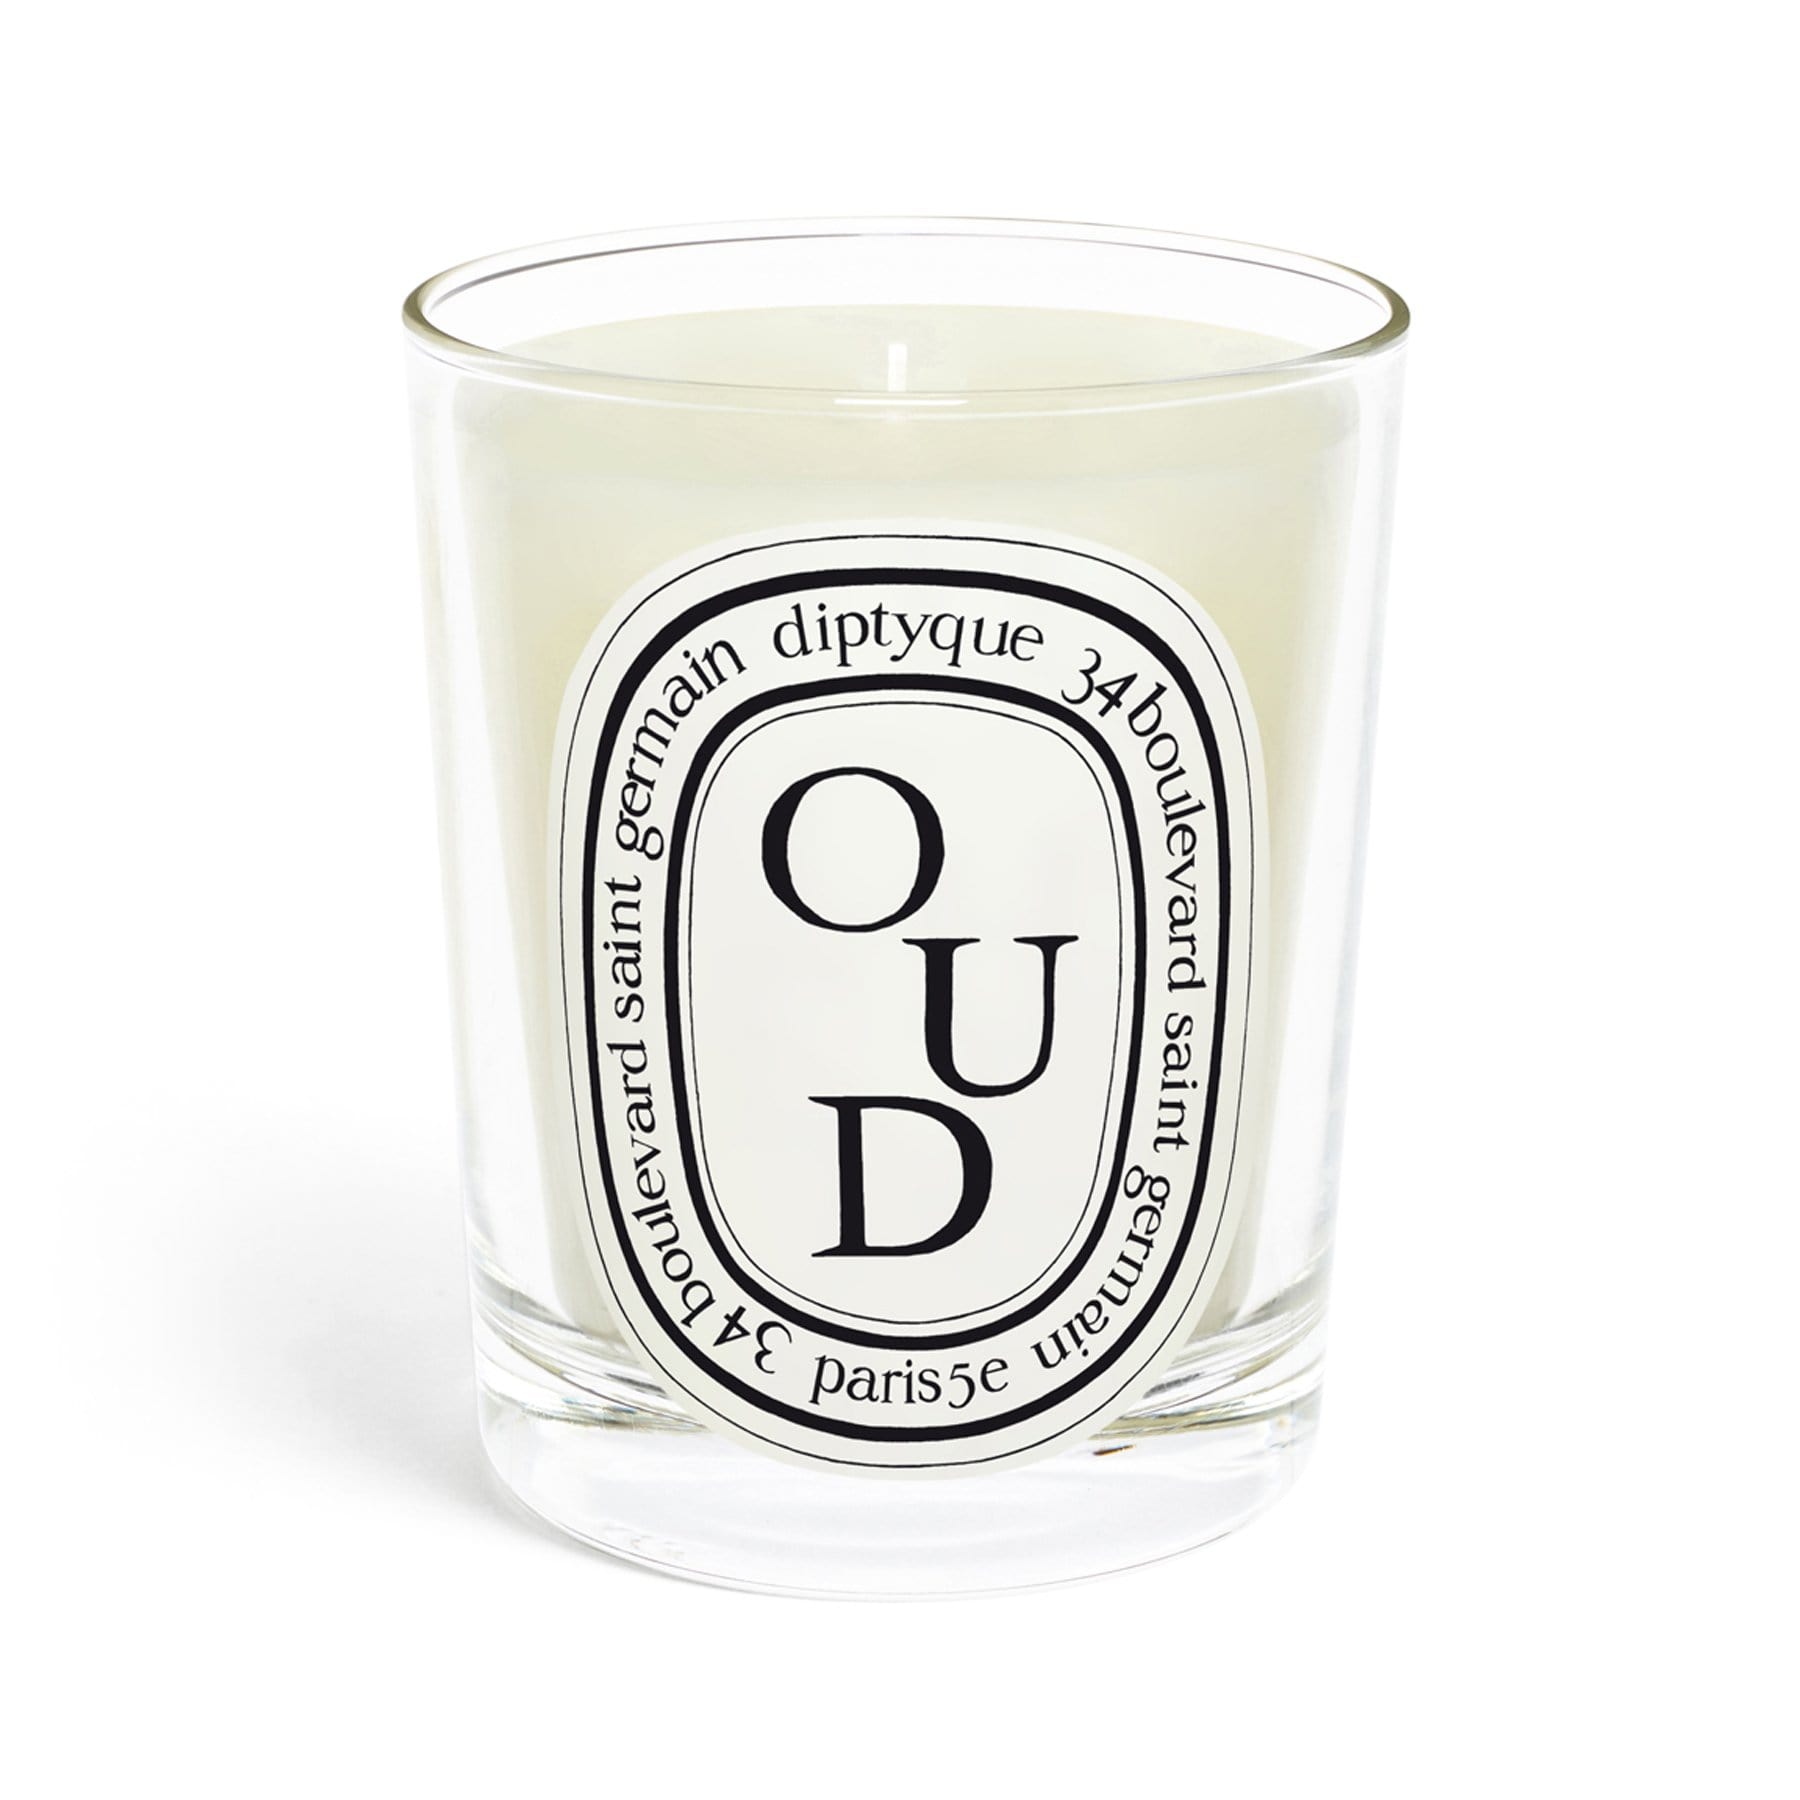 Oud Diptyque Scented Candle